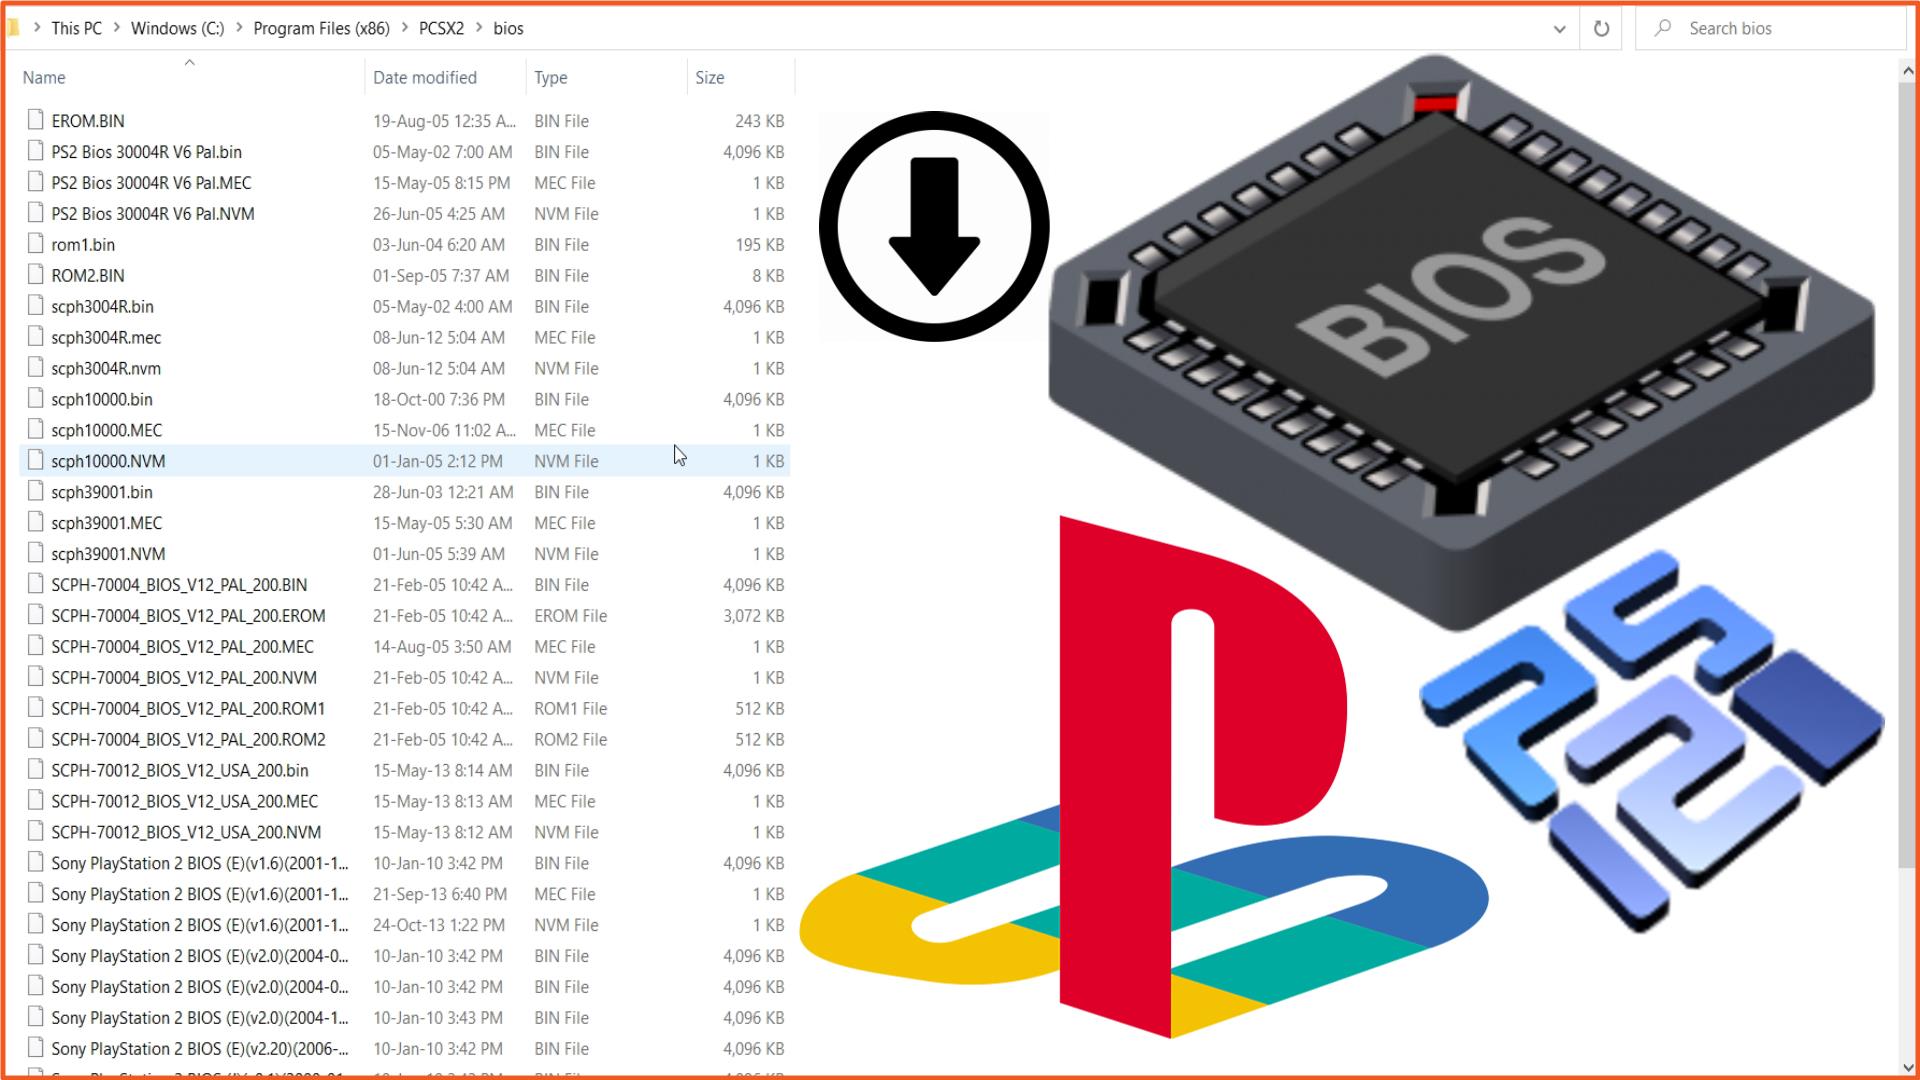 cool rom ps2 bios download